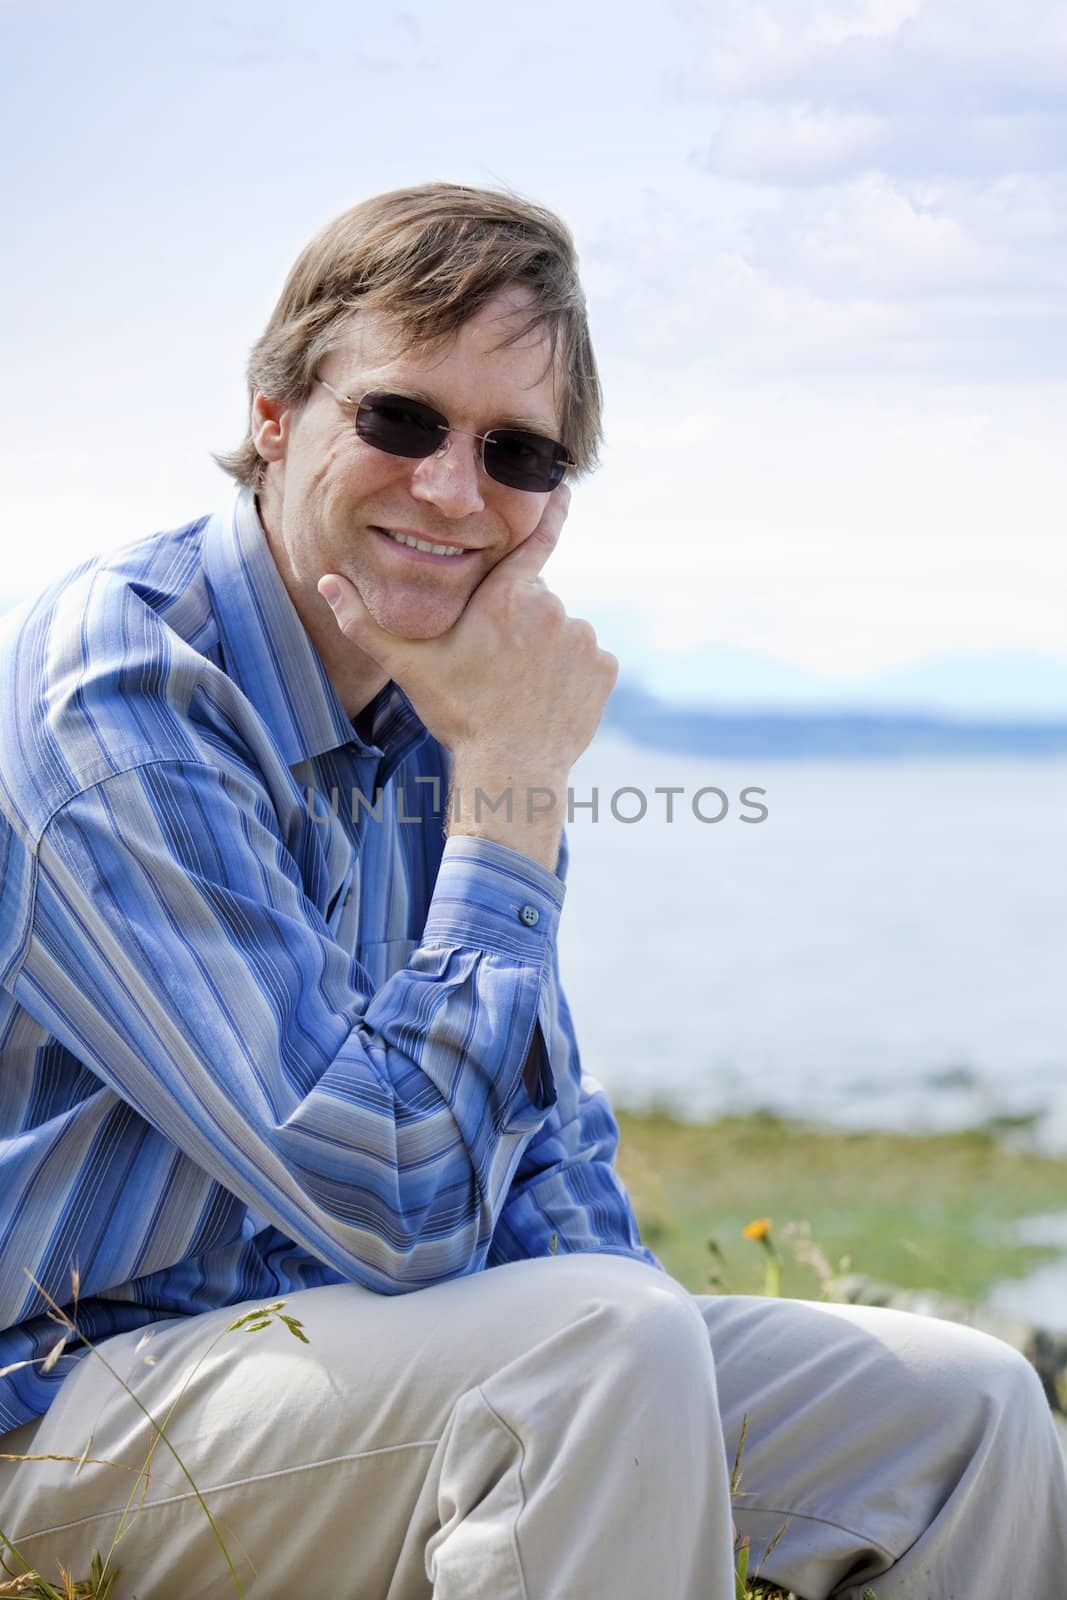 Handsome Causcasian man in forties, chin in hand,  relaxing by lake side